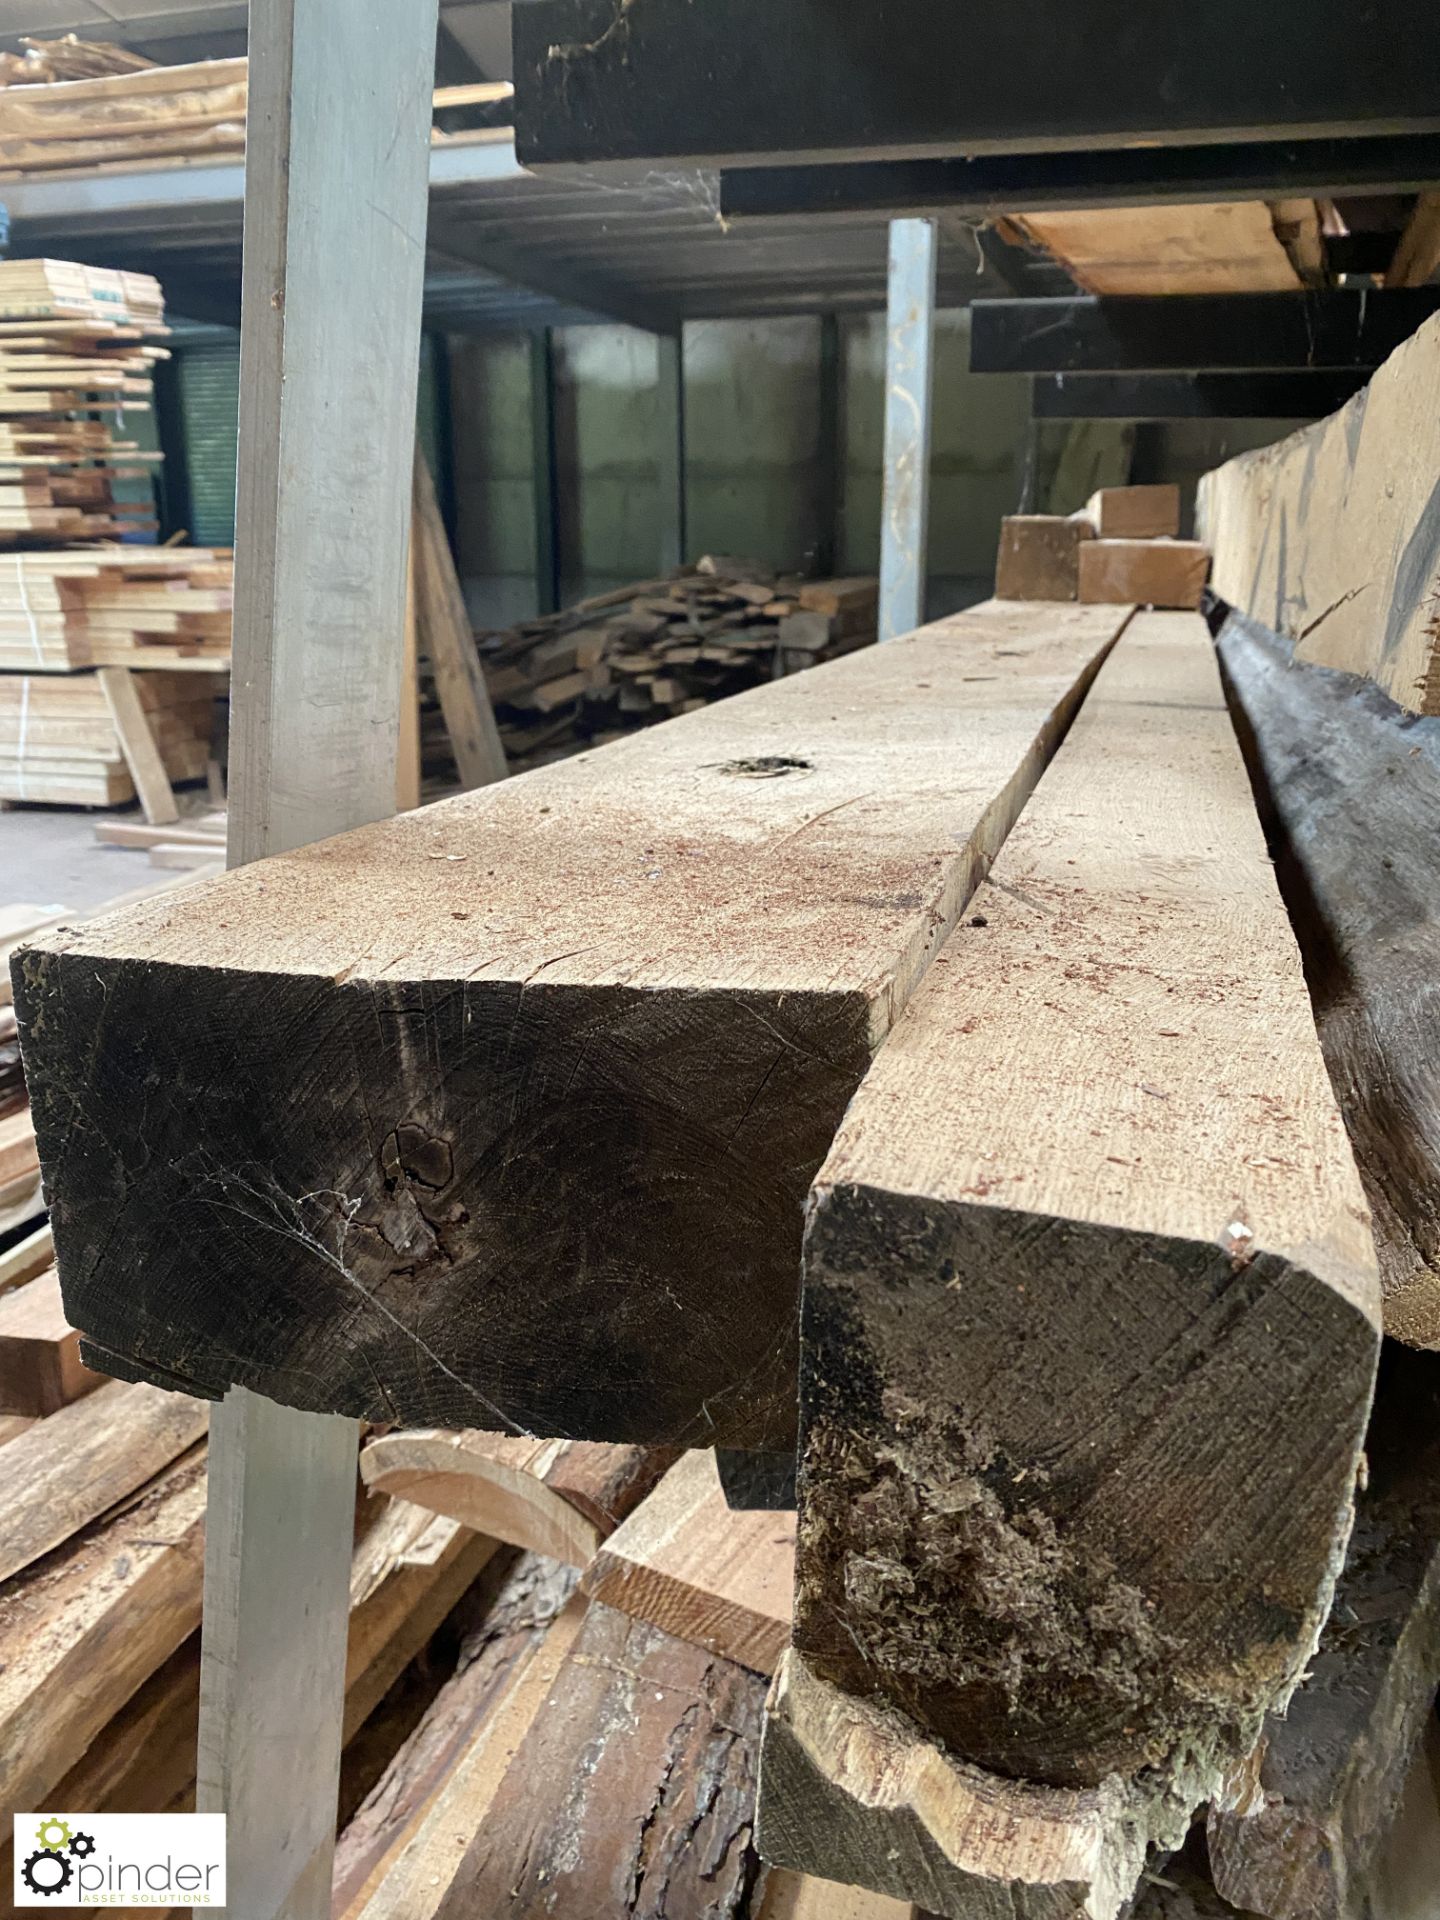 Air dried Oak Beam, 4300mm x 260mm x 150mm, Oak Beam 2460mm x 145mm x 110mm and 3 various Off Cuts